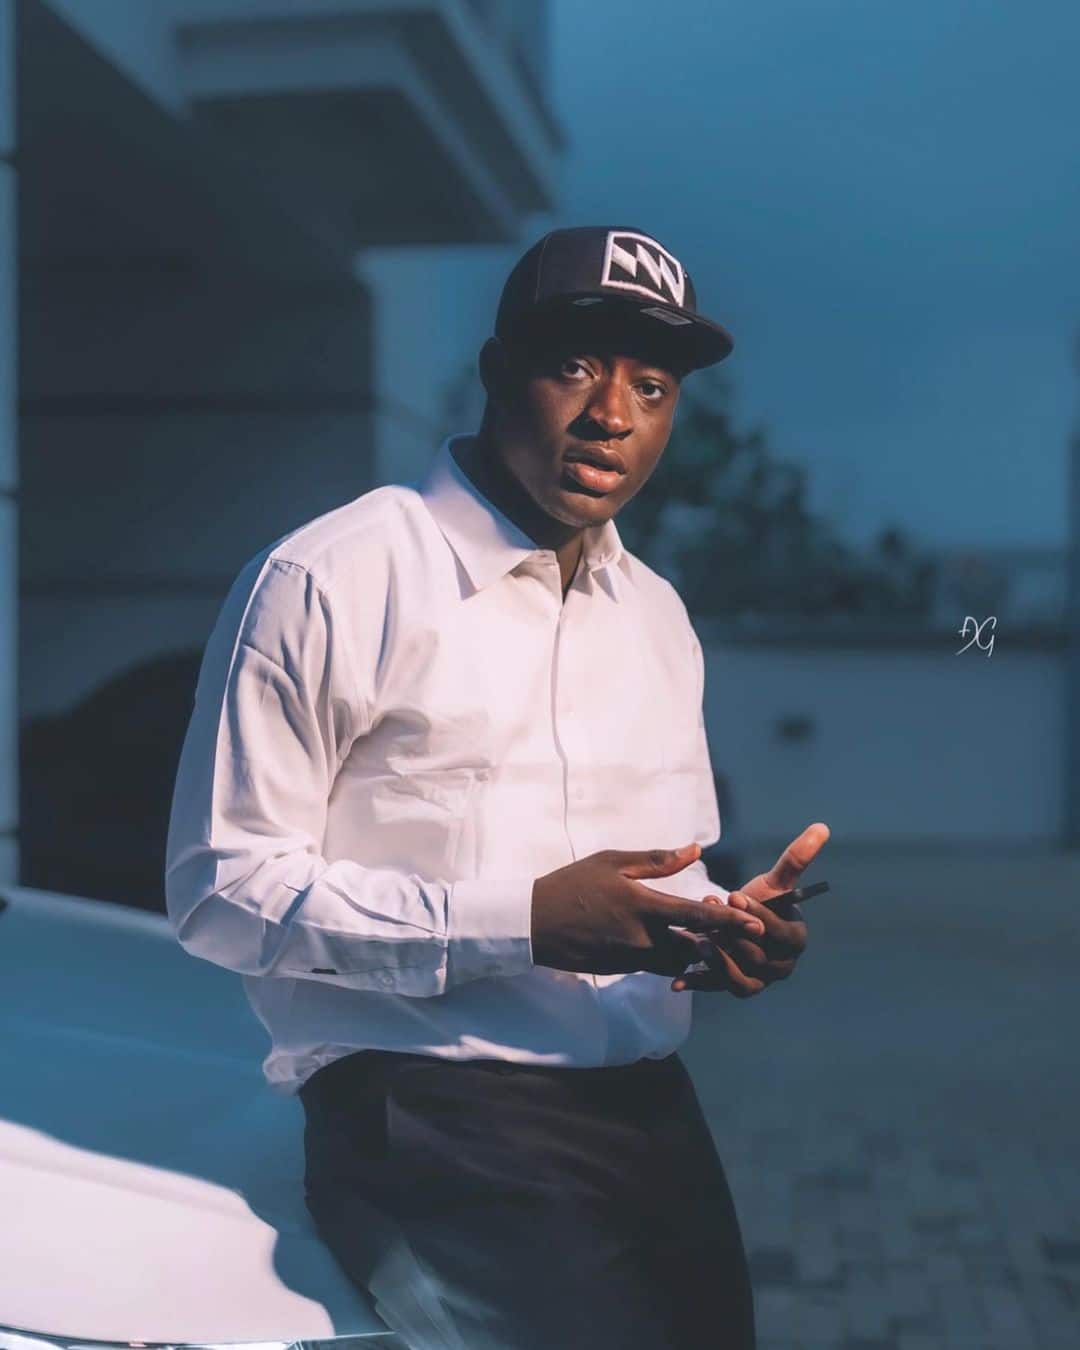 Carter Efe alleges that Lamba lied about buying Lamborghini (Video)